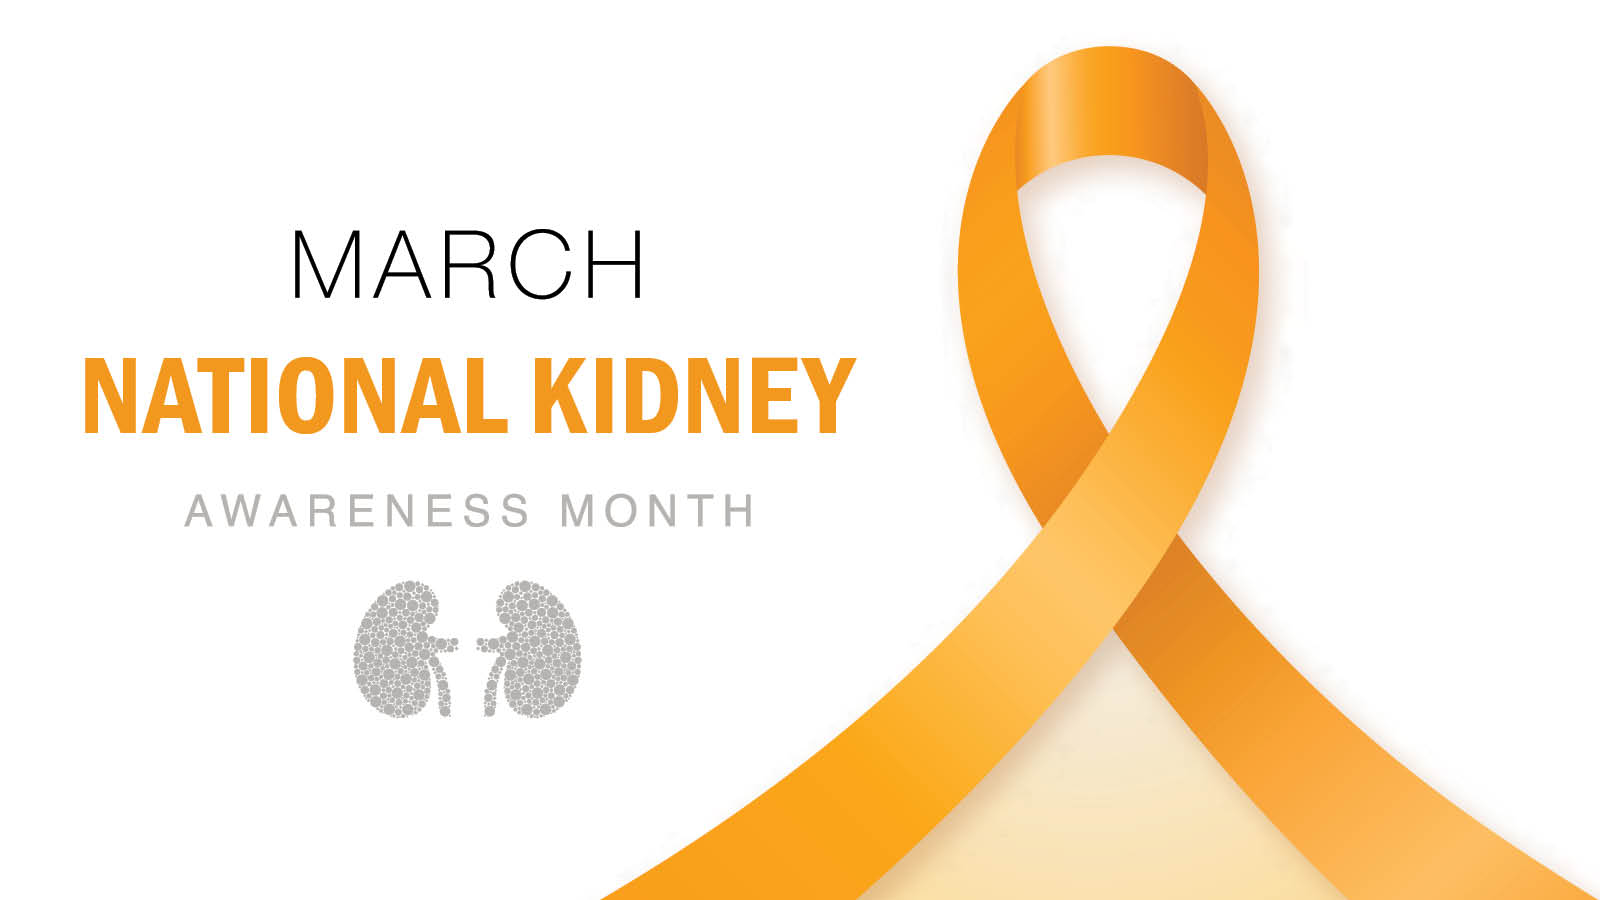 March is National Kidney Month. Learn how to do your part in promoting better kidney health.